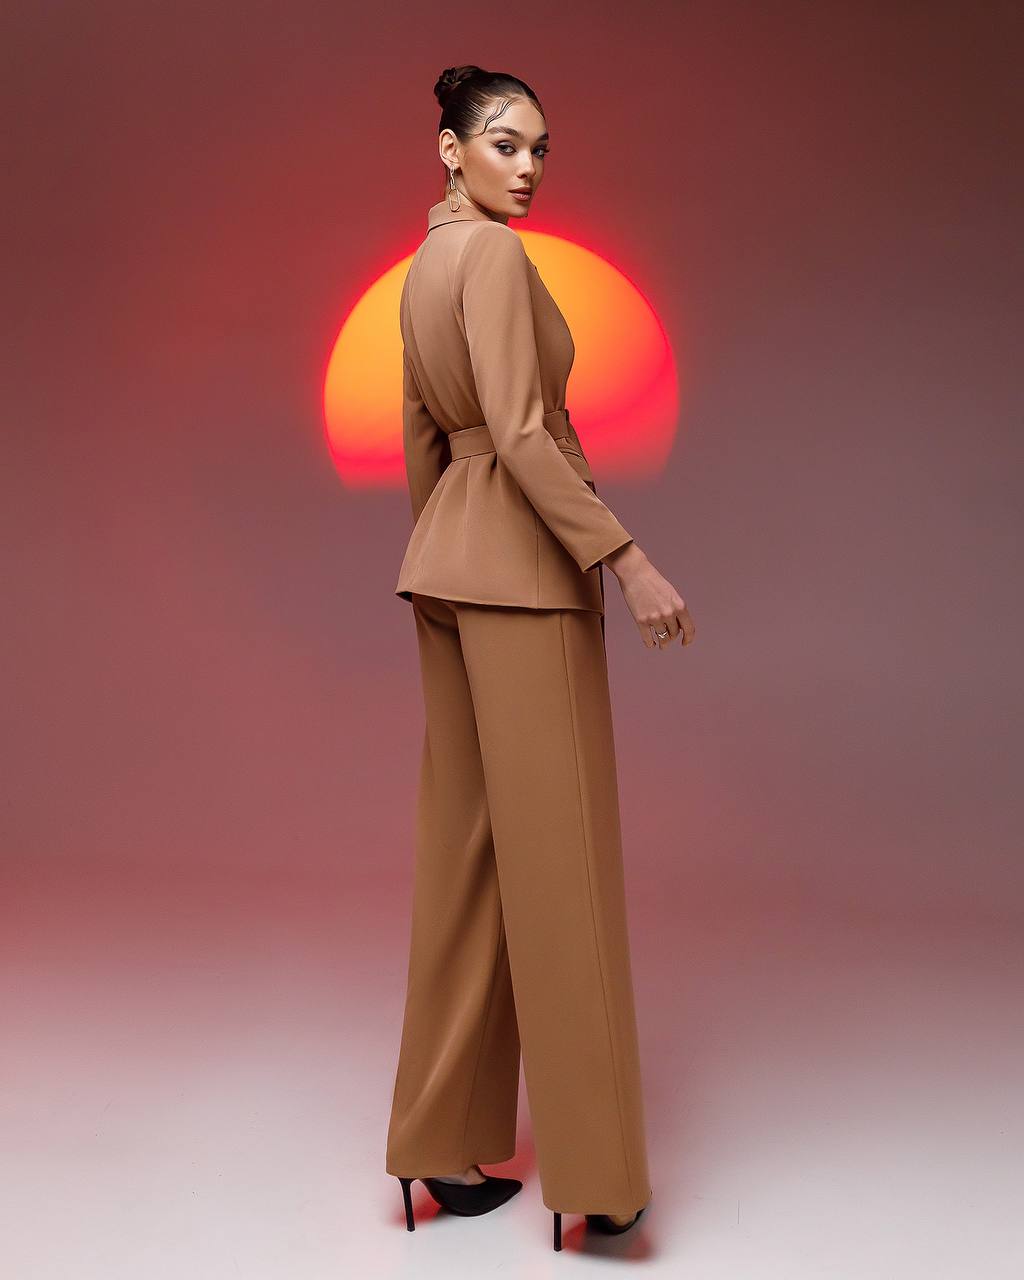 a woman in a tan suit standing in front of a red sun